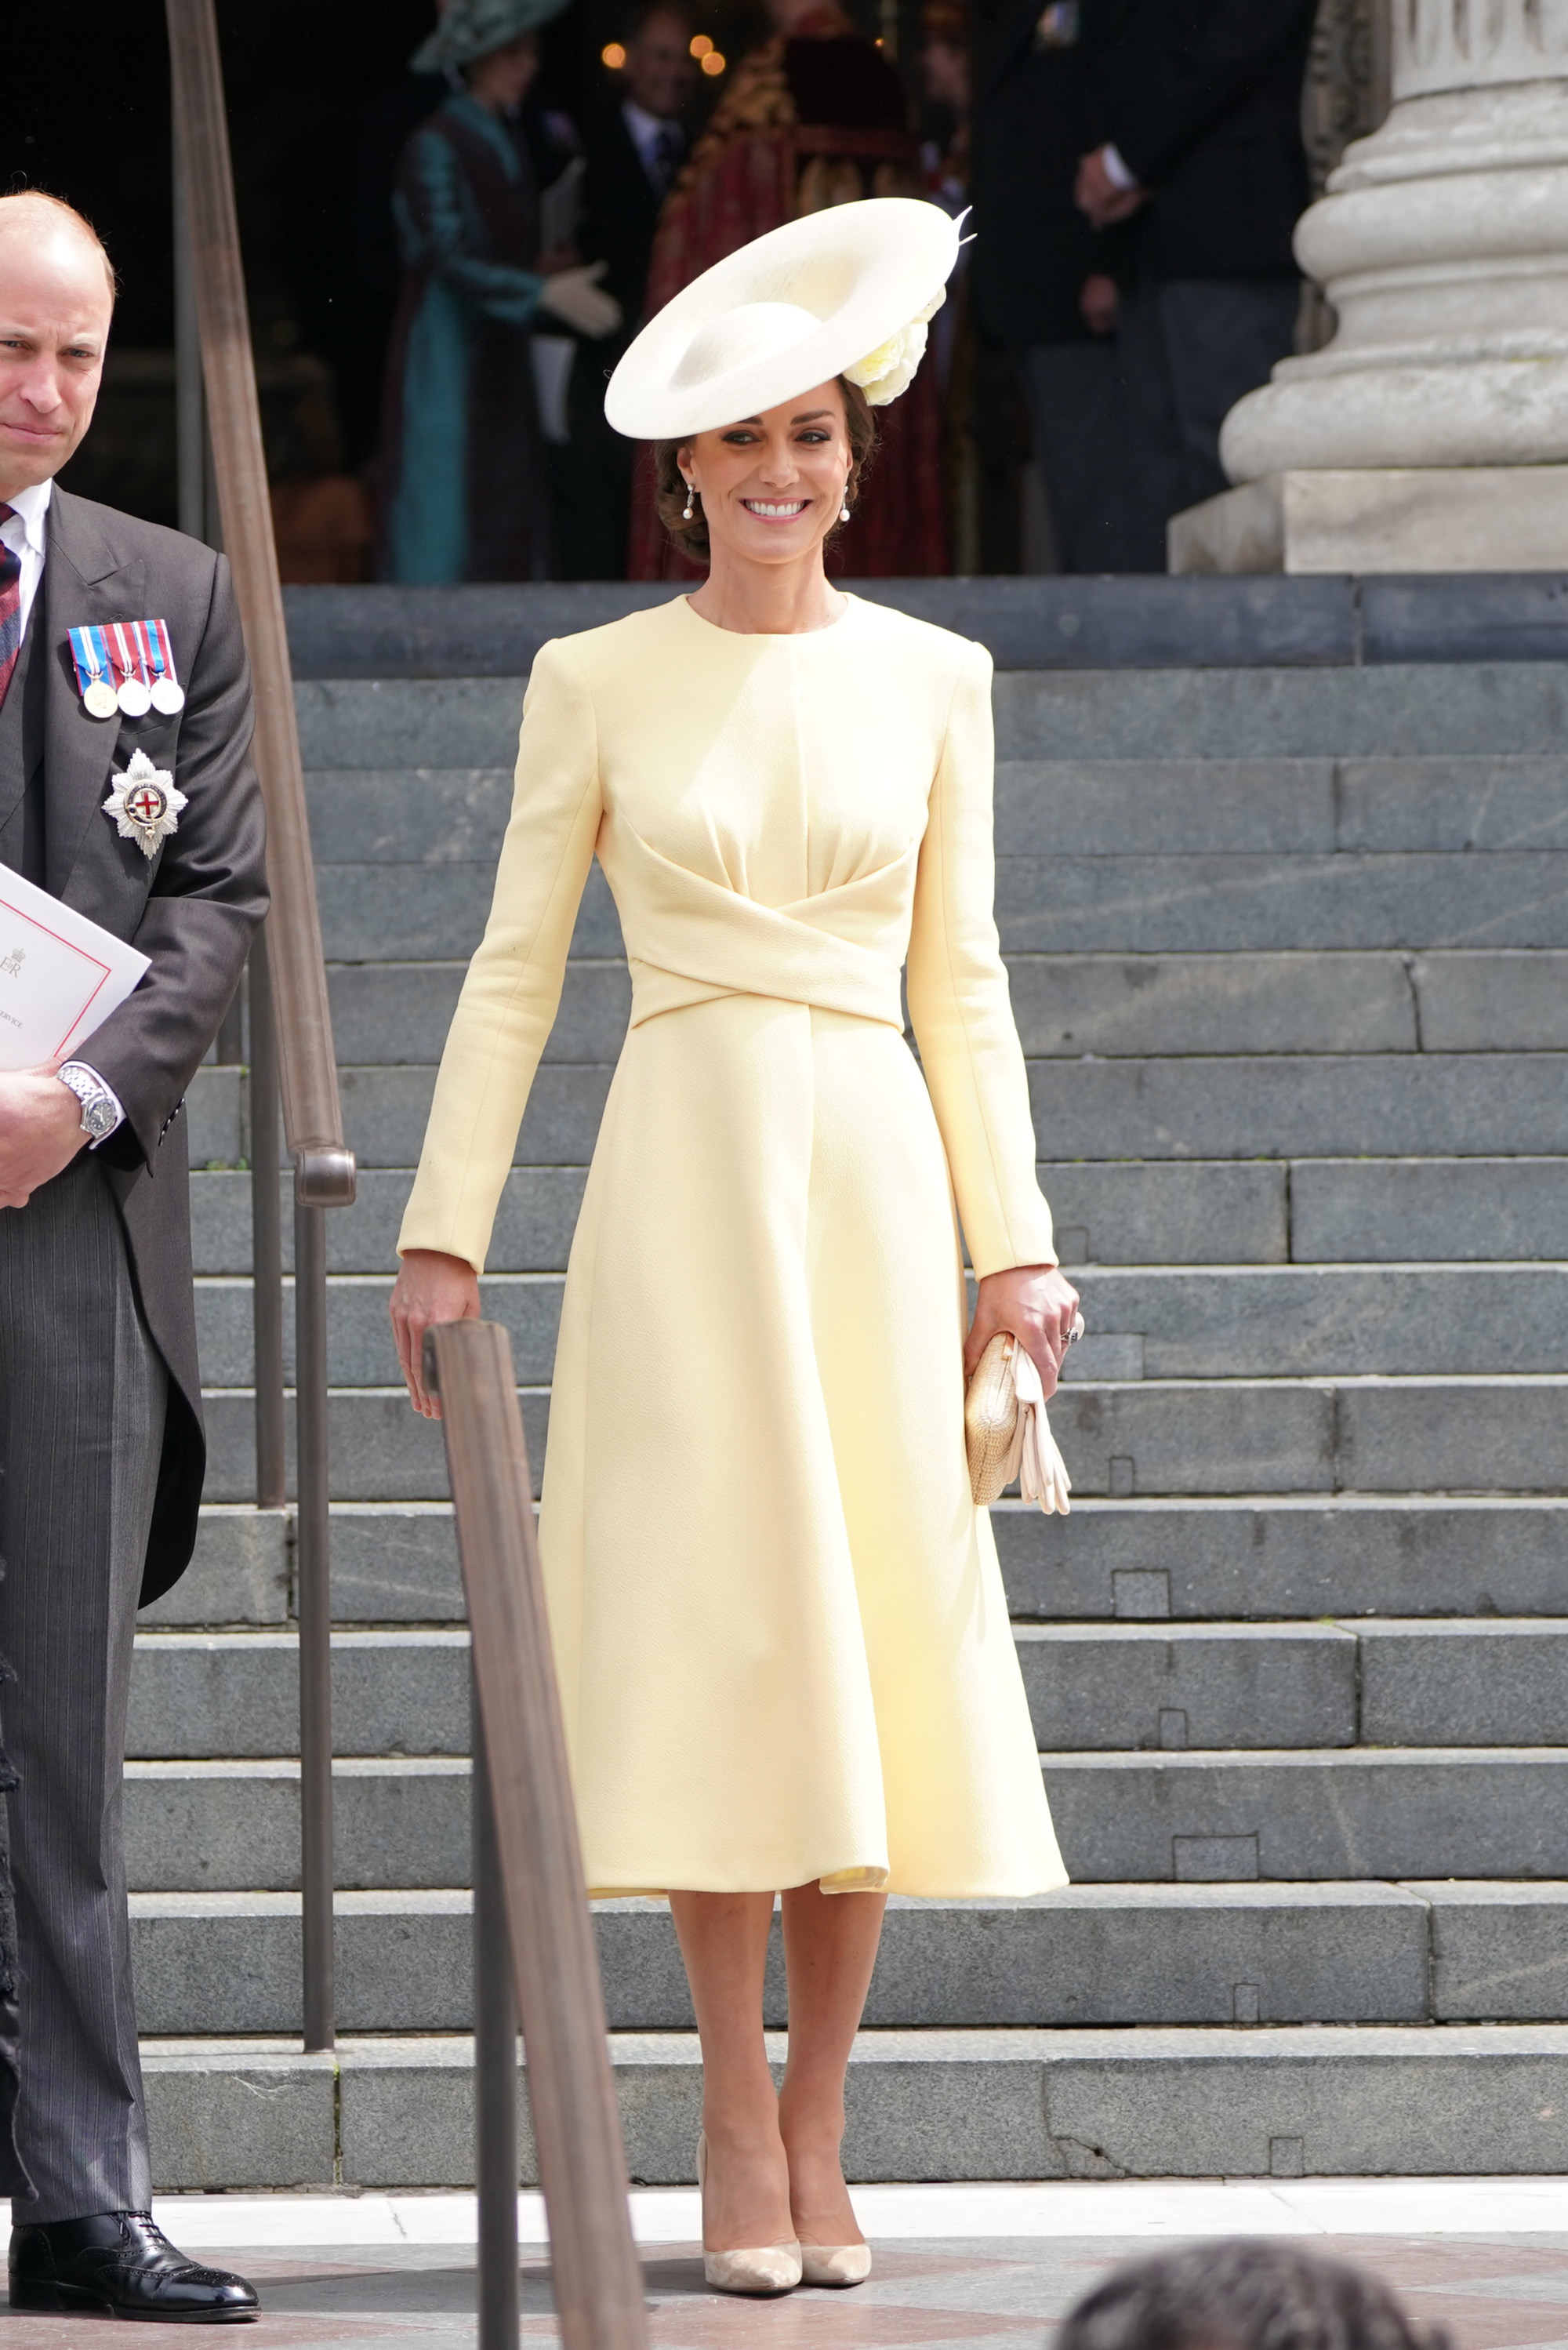 How to wear yellow like Blackpink’s Lisa, Kate Middleton, Anne Hathaway ...